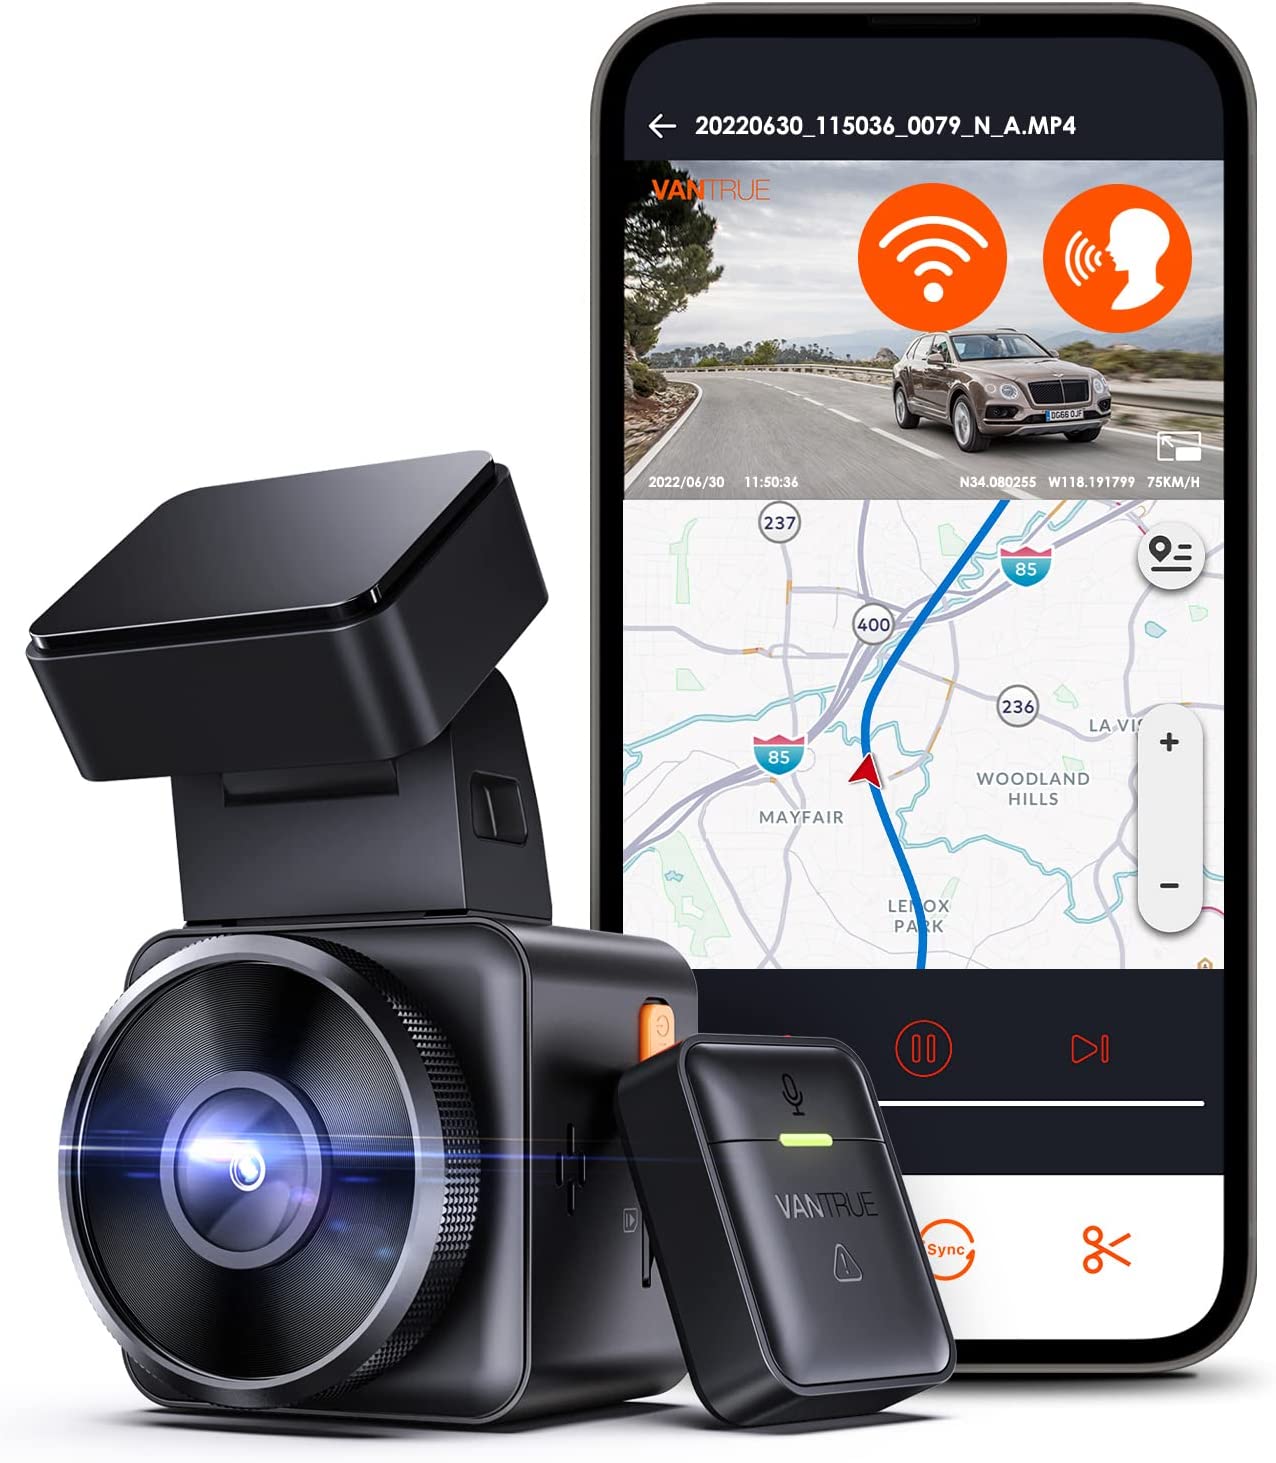 Vantrue E1 2.7K WiFi Mini Dash Cam with GPS and Speed, Voice Control Front Car Dash Camera, 24 Hours Parking Mode, Night Vision, Buffered Motion